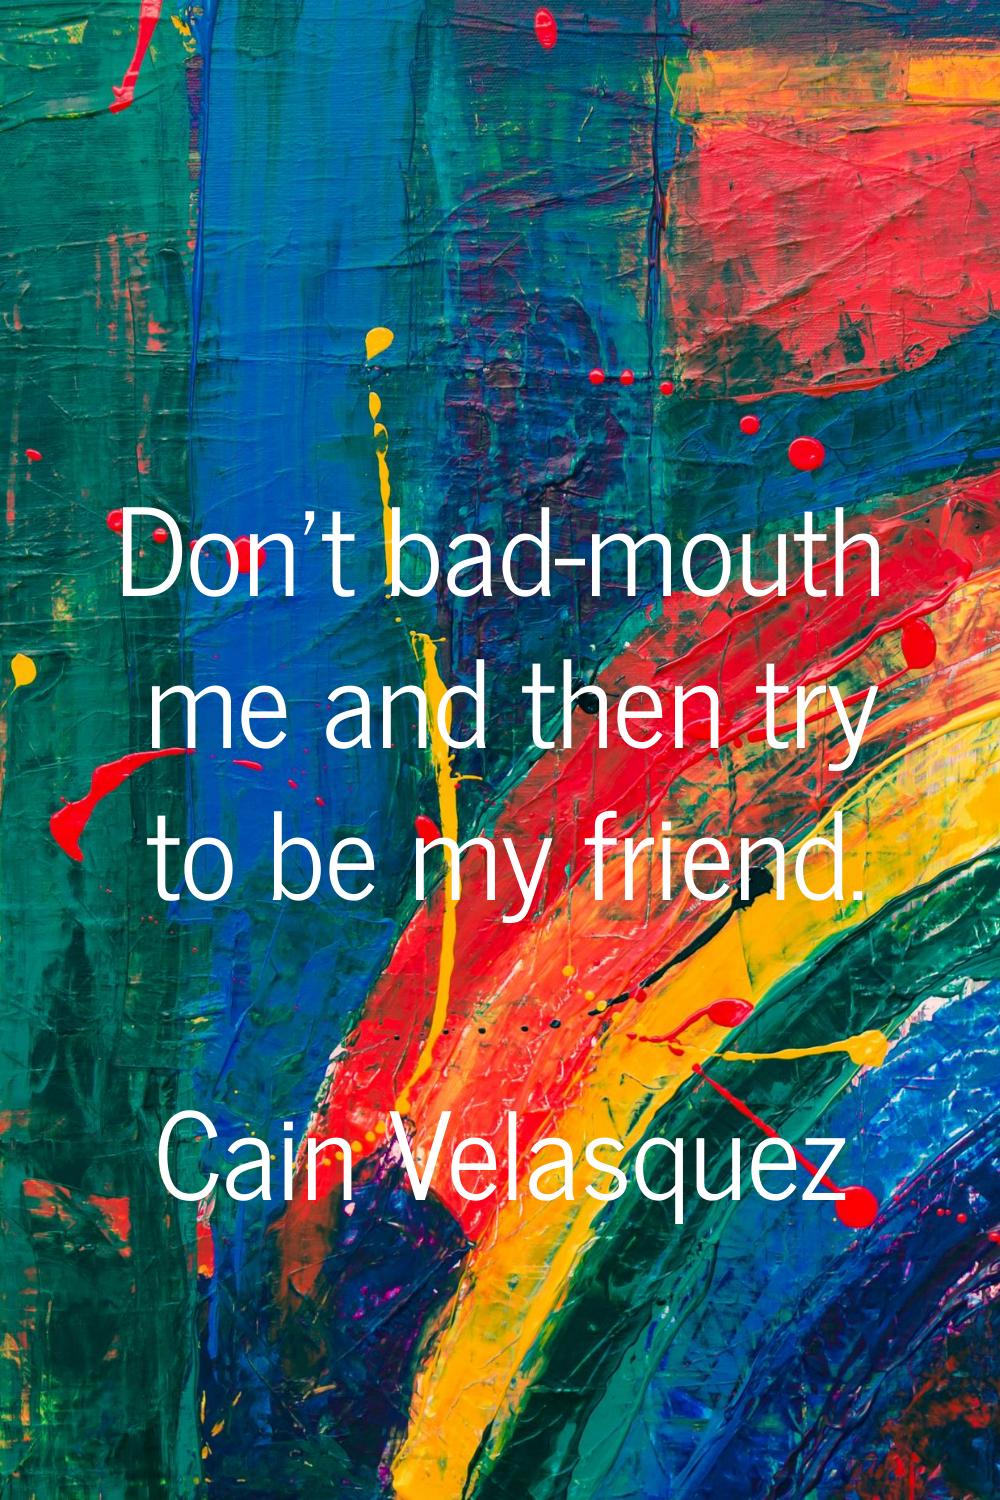 Don't bad-mouth me and then try to be my friend.